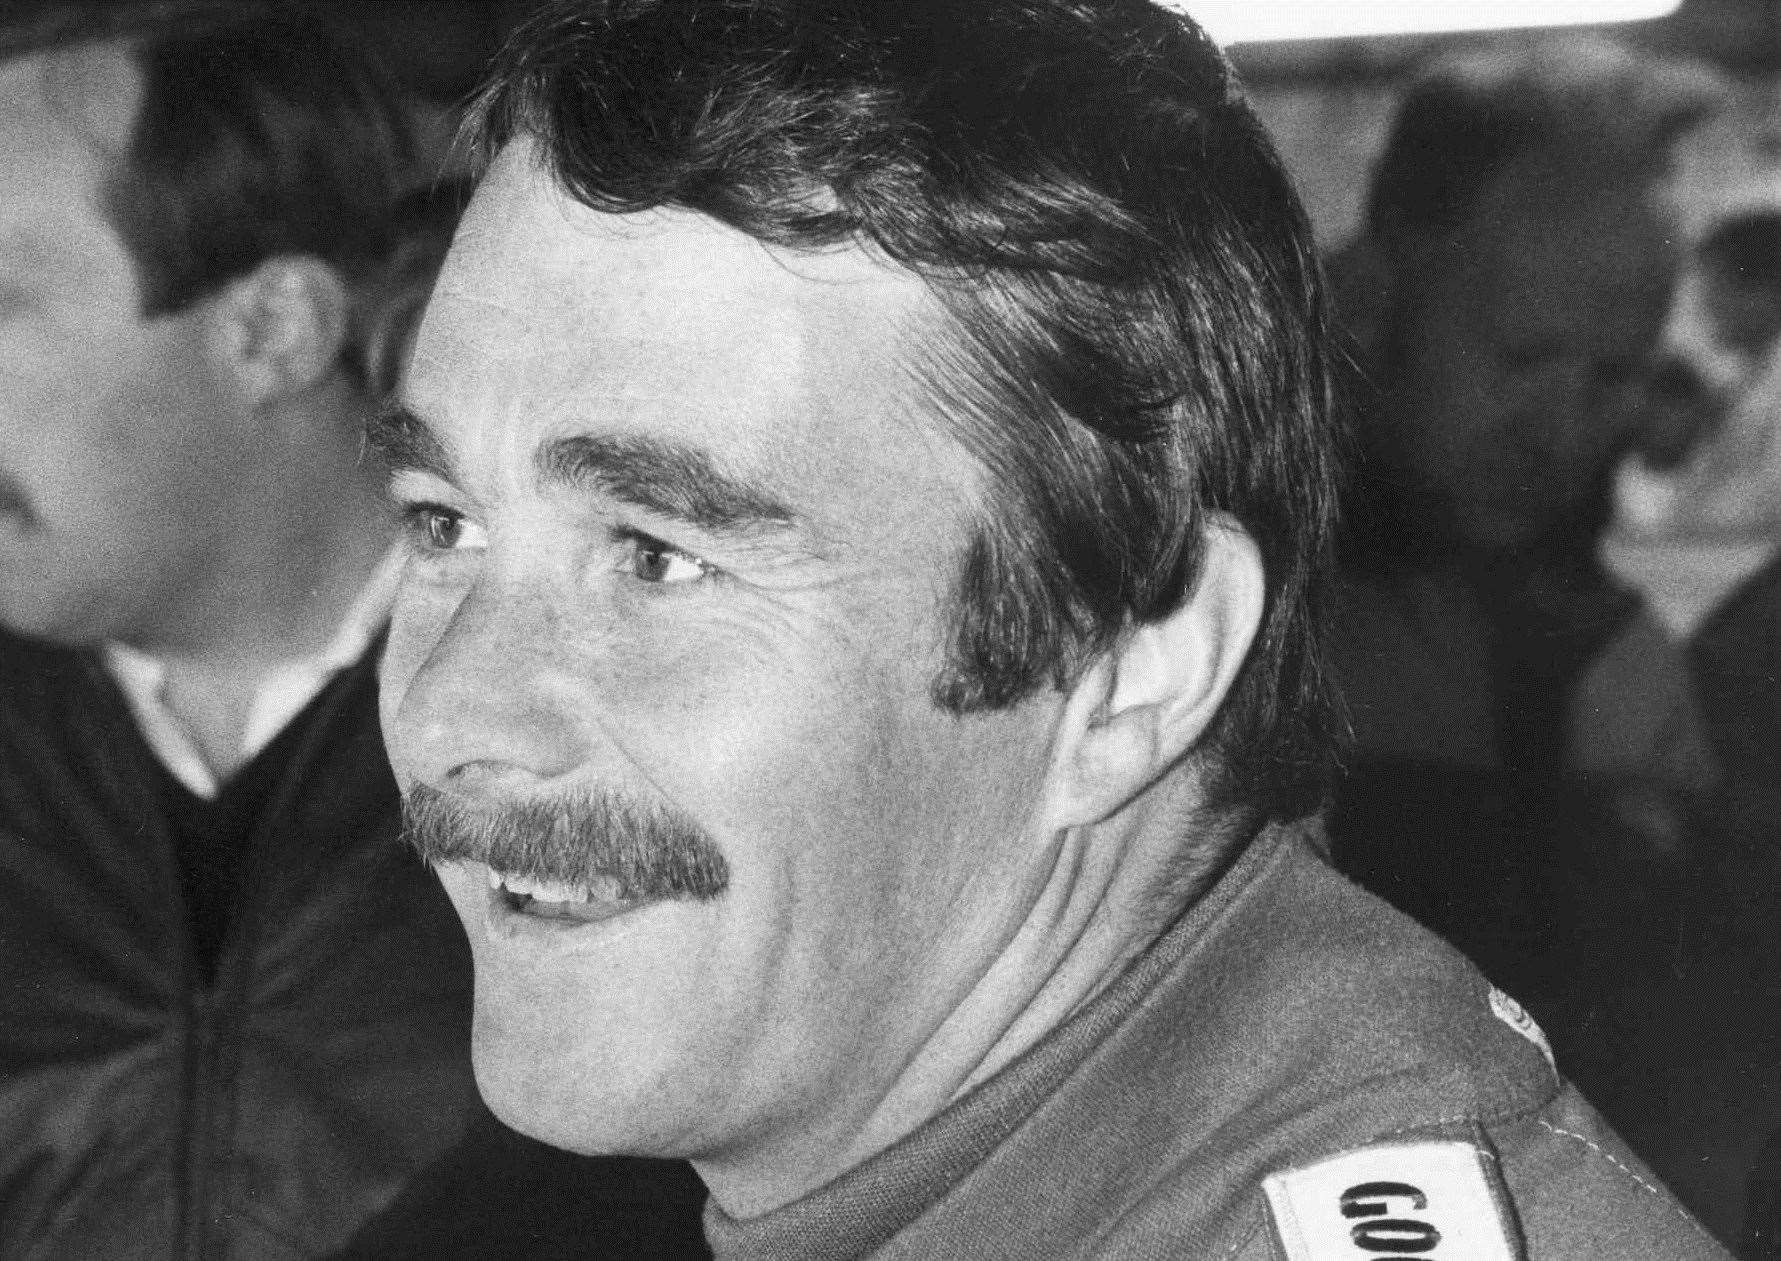 Nigel Mansell won the final F1 GP at Brands in 1986. Here modelling that fine moustache of his